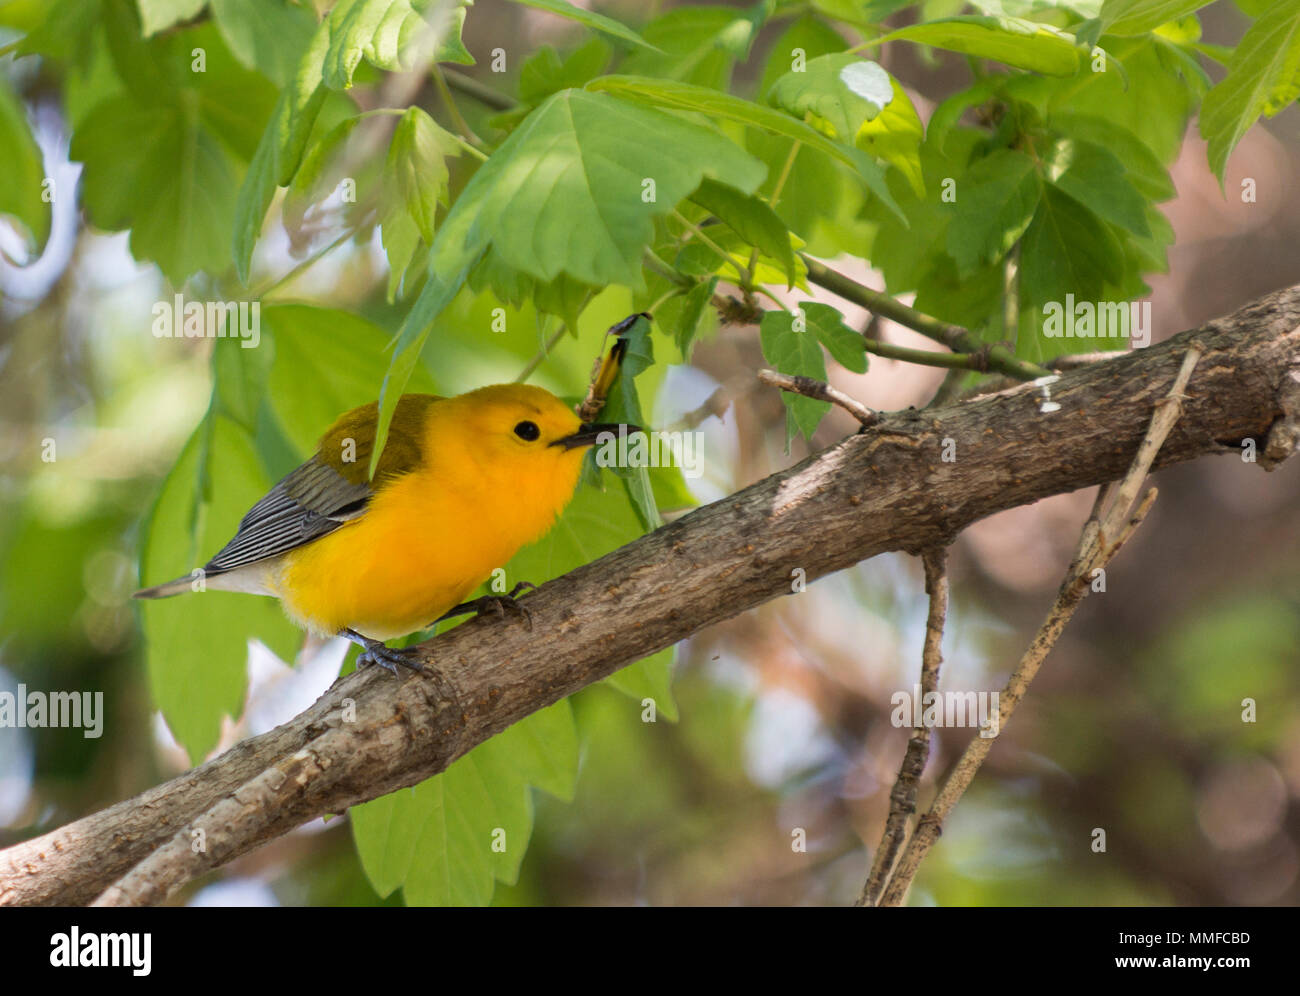 A Prothonotary Warbler bird seen  at Magee Marsh in Northwest Ohio during the spring migration. Stock Photo